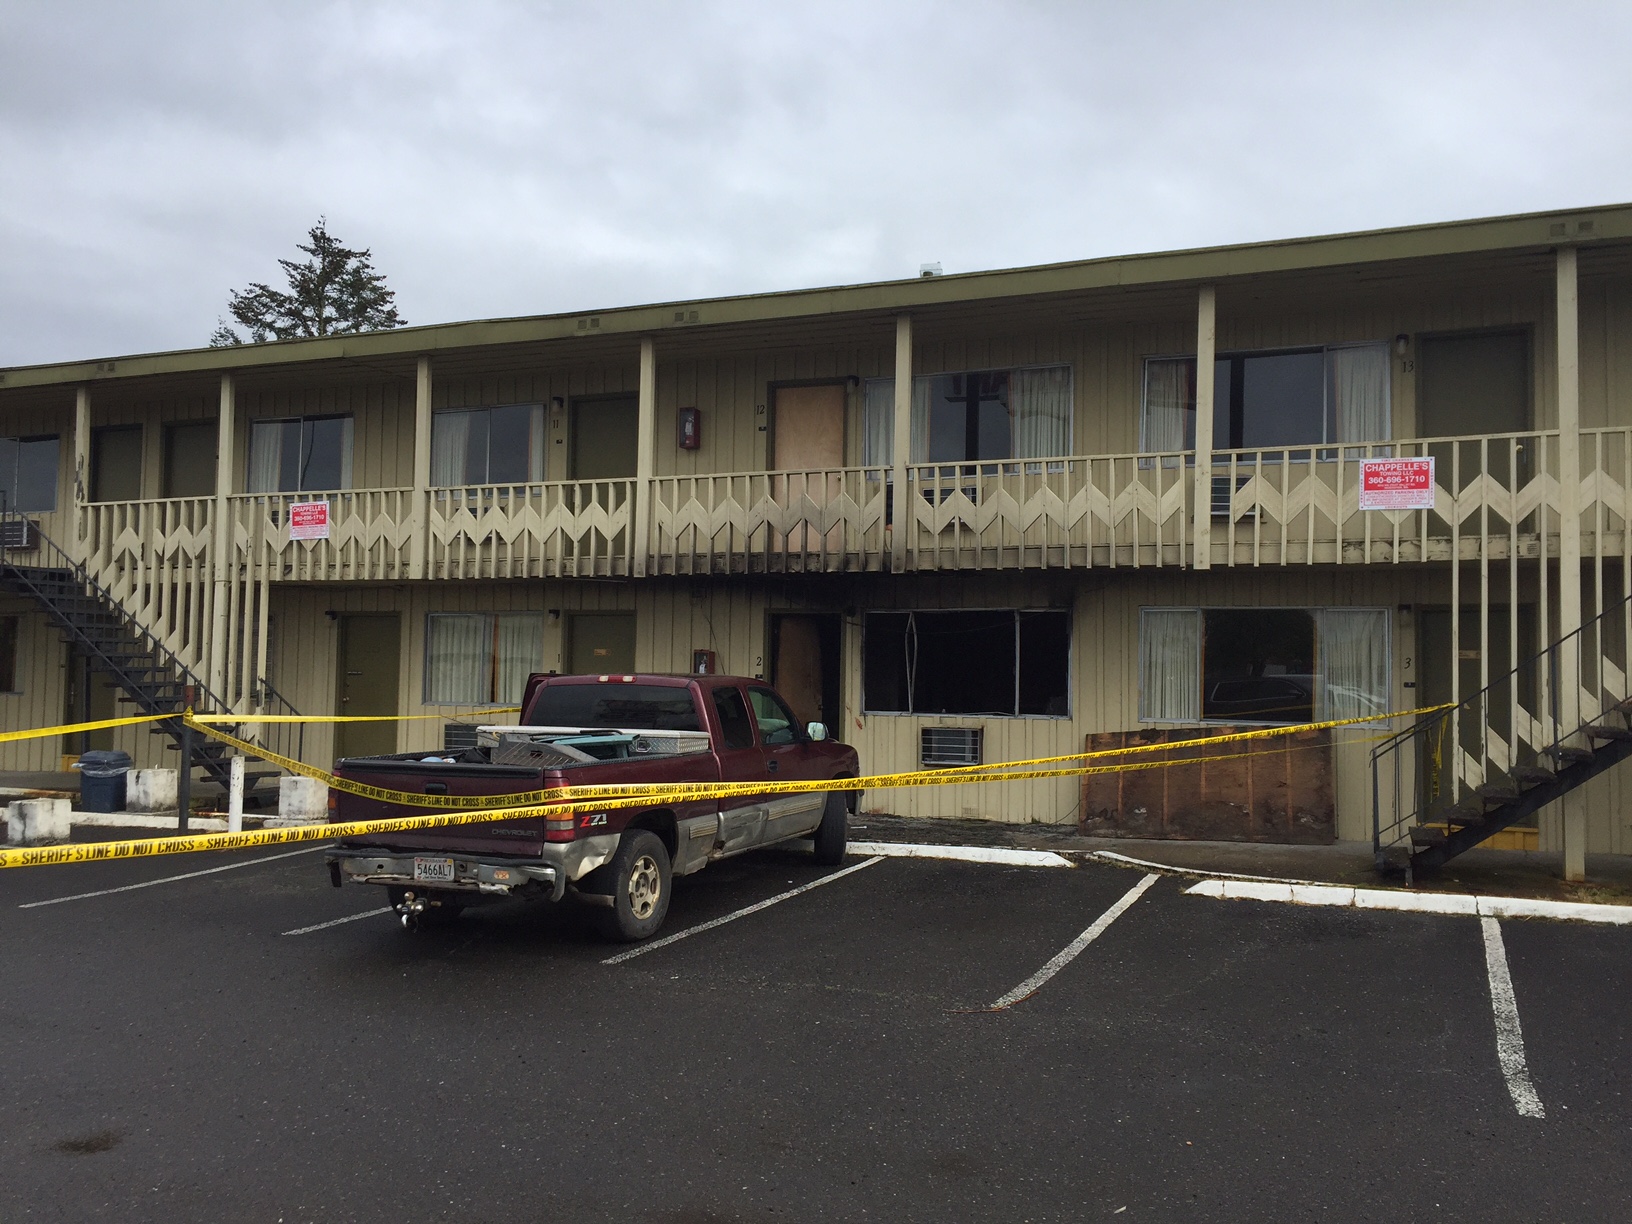 A man was injured in a fire at the Value Motel, 708 N.E. 78th St., reported just after 4 a.m. today.